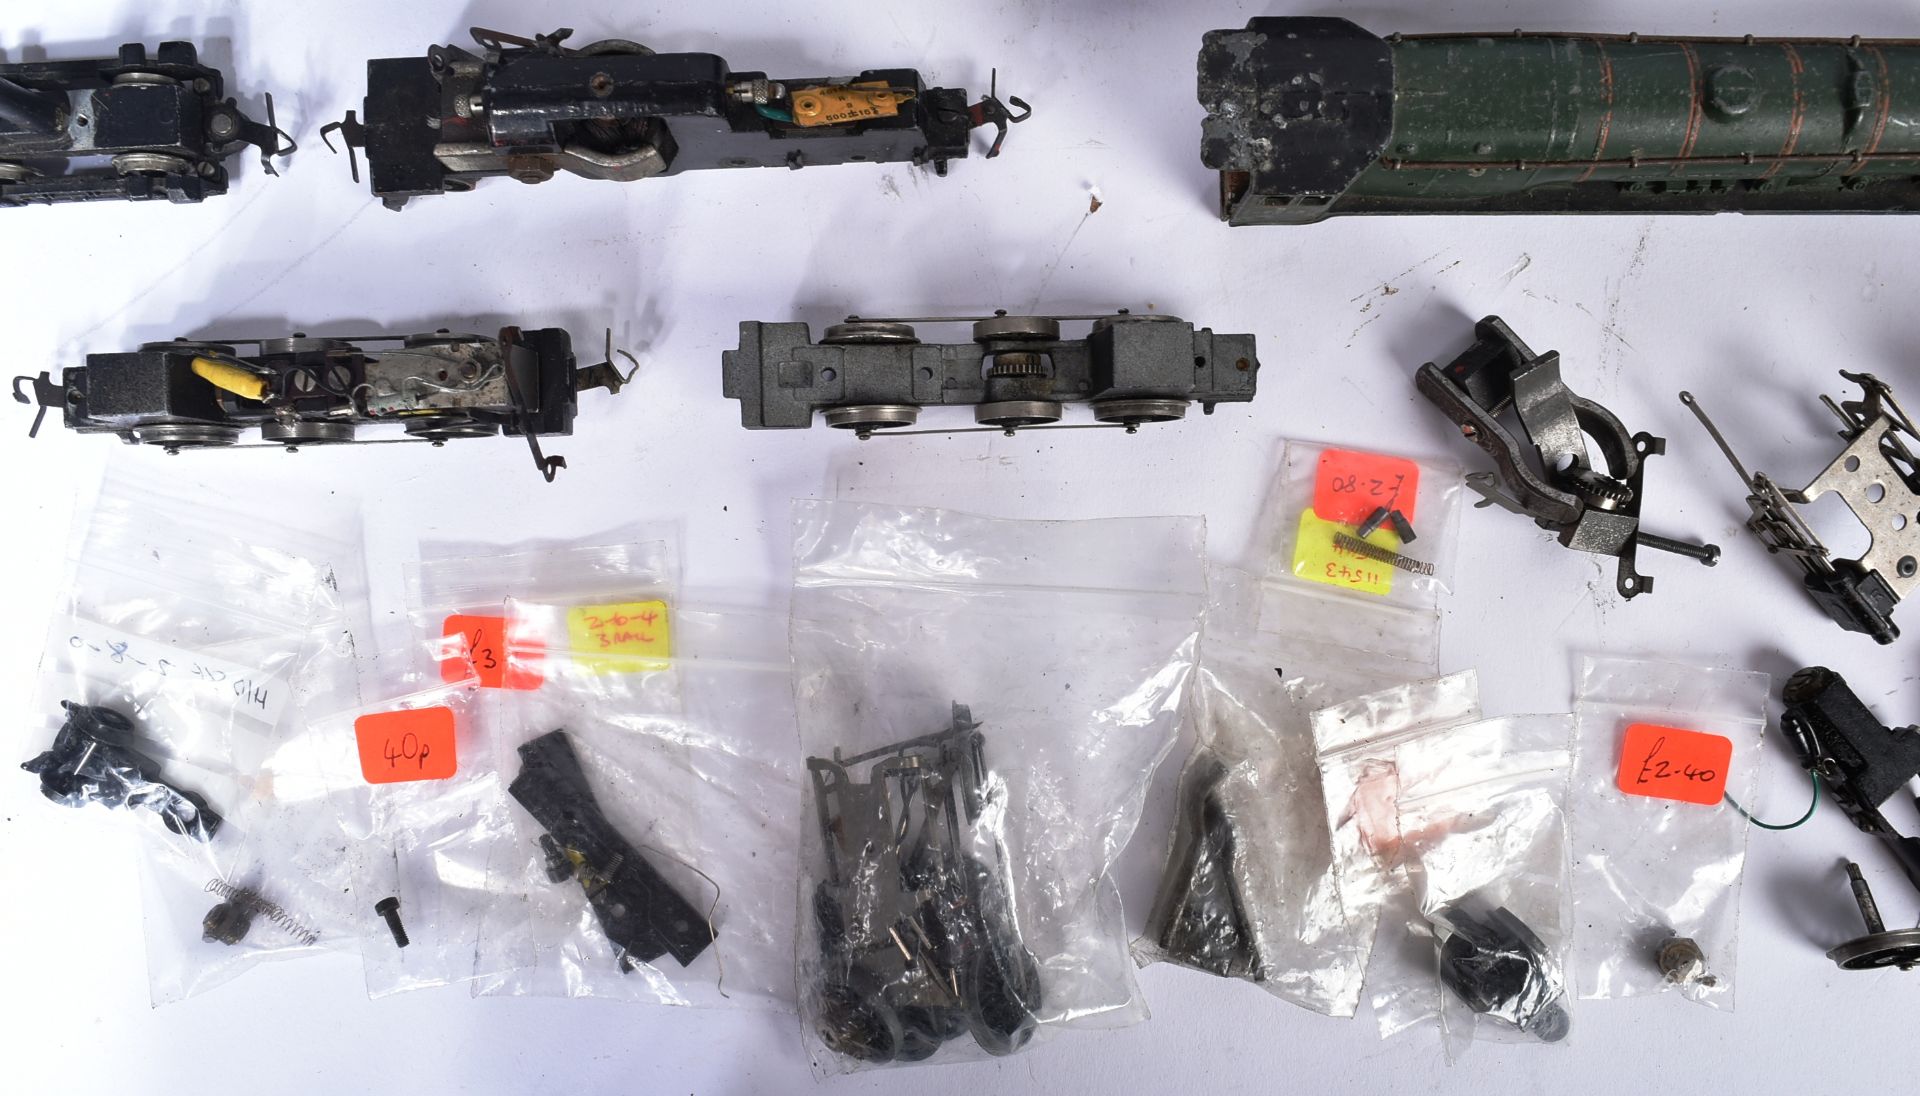 MODEL RAILWAY - COLLECTION OF OO GAUGE LOCOMOTIVE ENGINE SPARE PARTS - Image 5 of 6